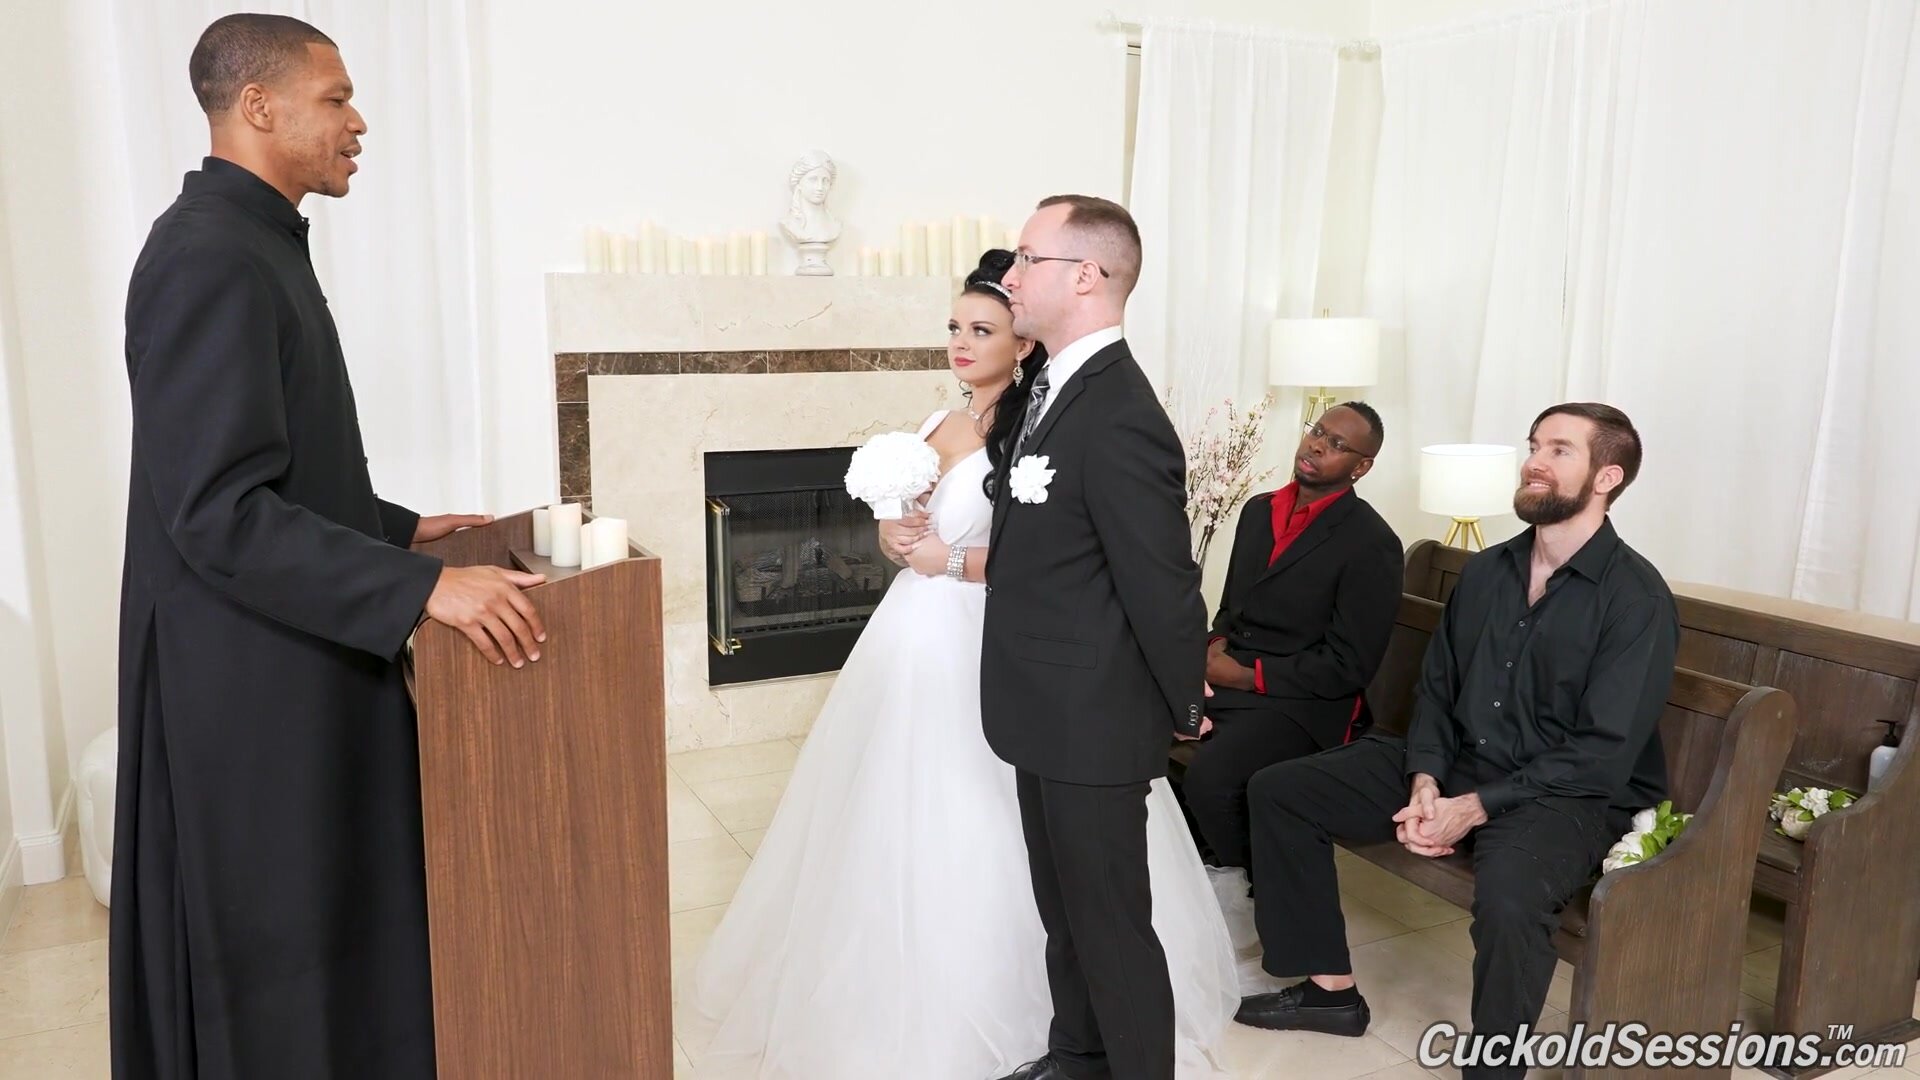 Cuckold Sessions - Payton Preslee's wedding turns rough interracial threesome